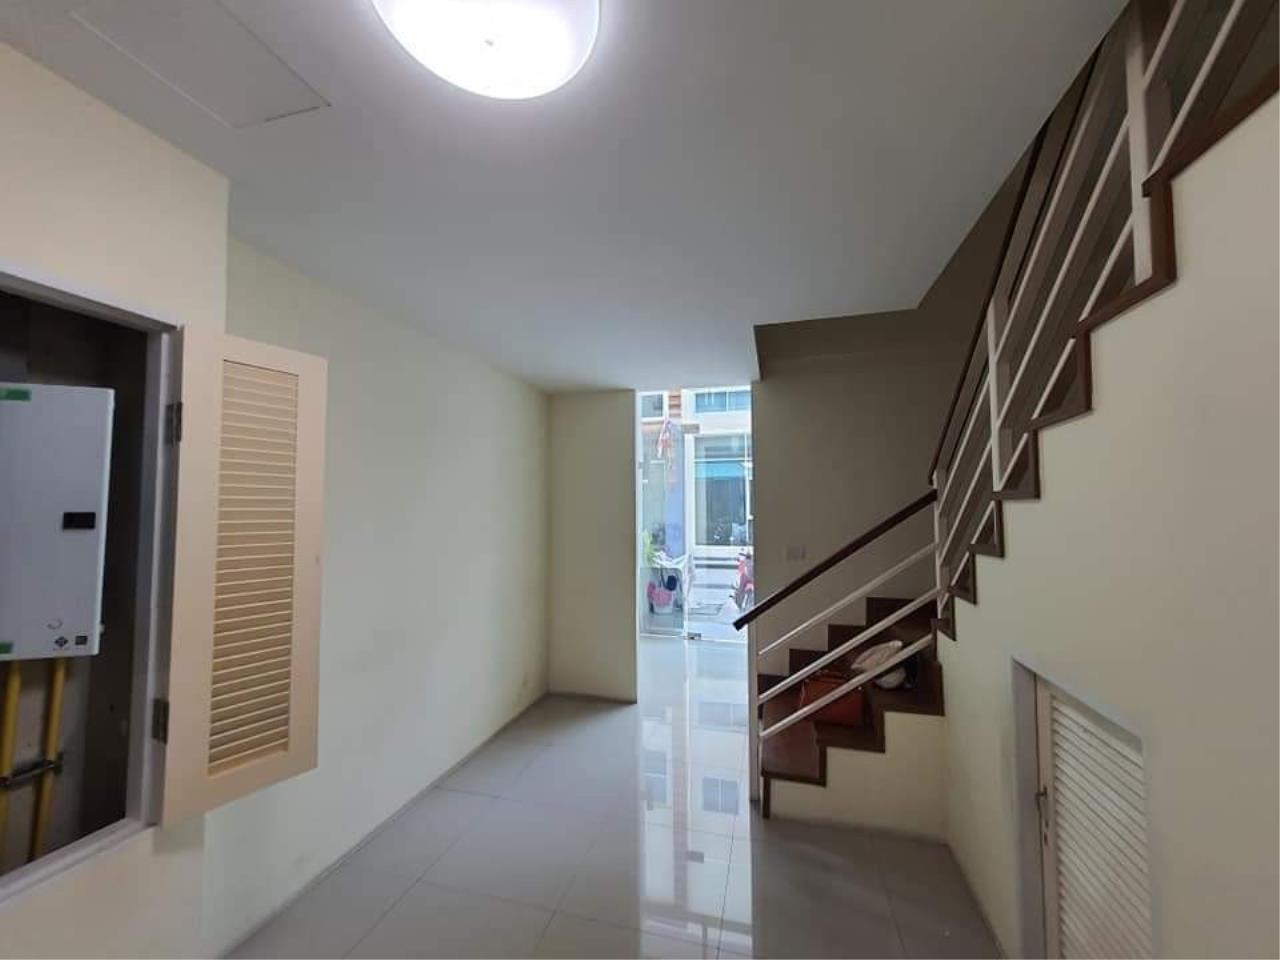 Ideal home real estate Agency's H10 Commercial Building for Sale 3.5 Storeys CBP, Chiang Mai 065-9657828 4